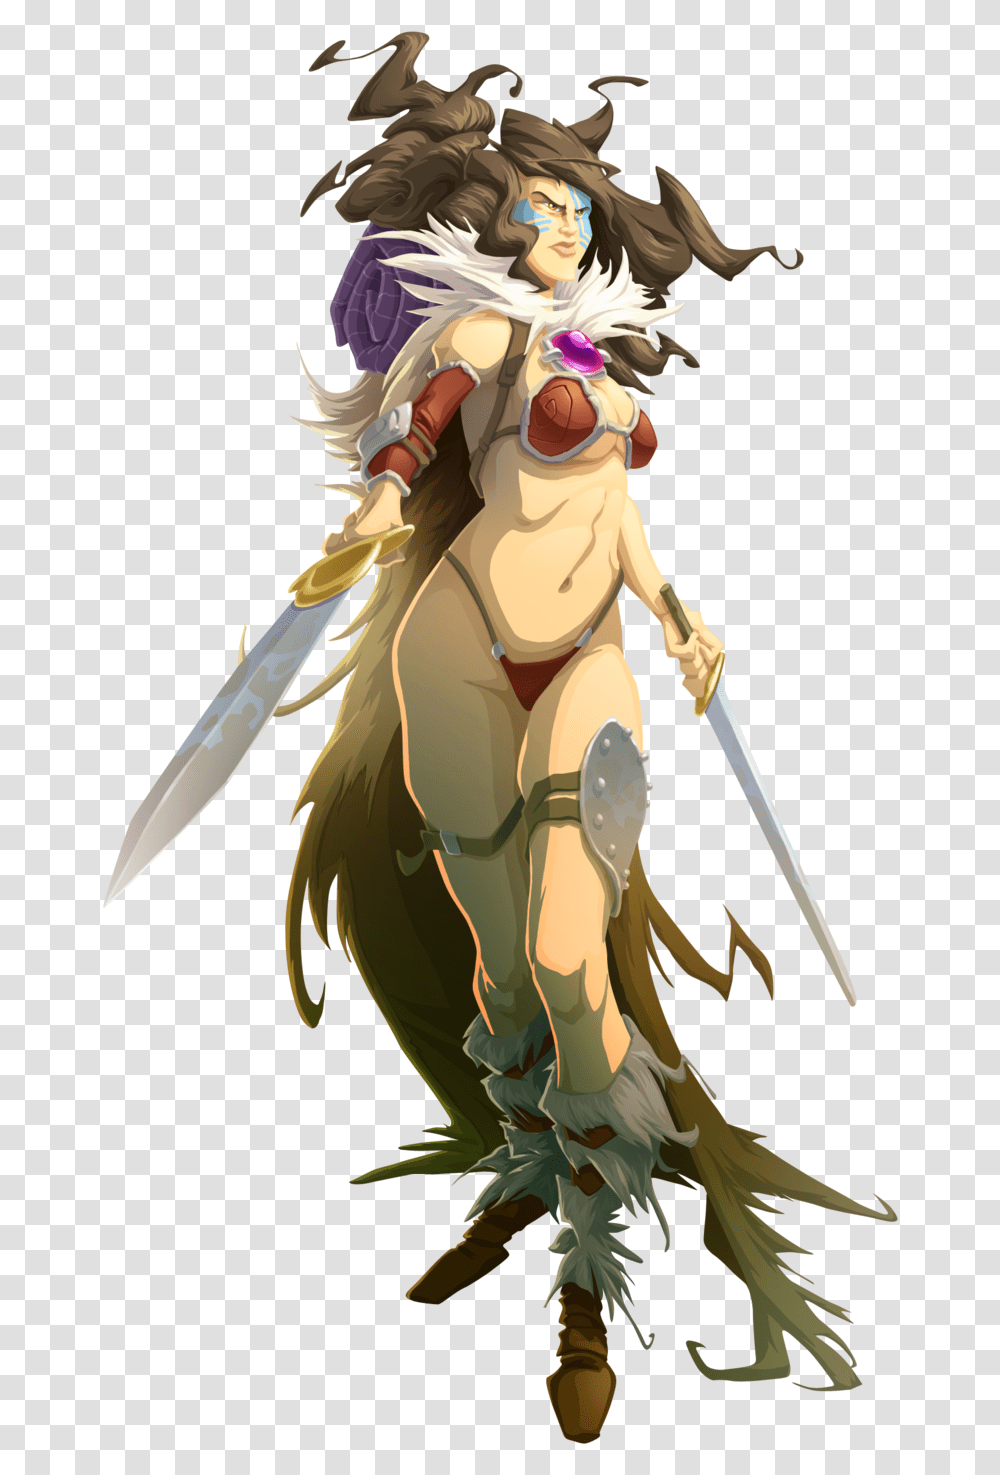 Barbarian Female Download Massive Darkness Mila, Person, Duel, Knight, Weapon Transparent Png